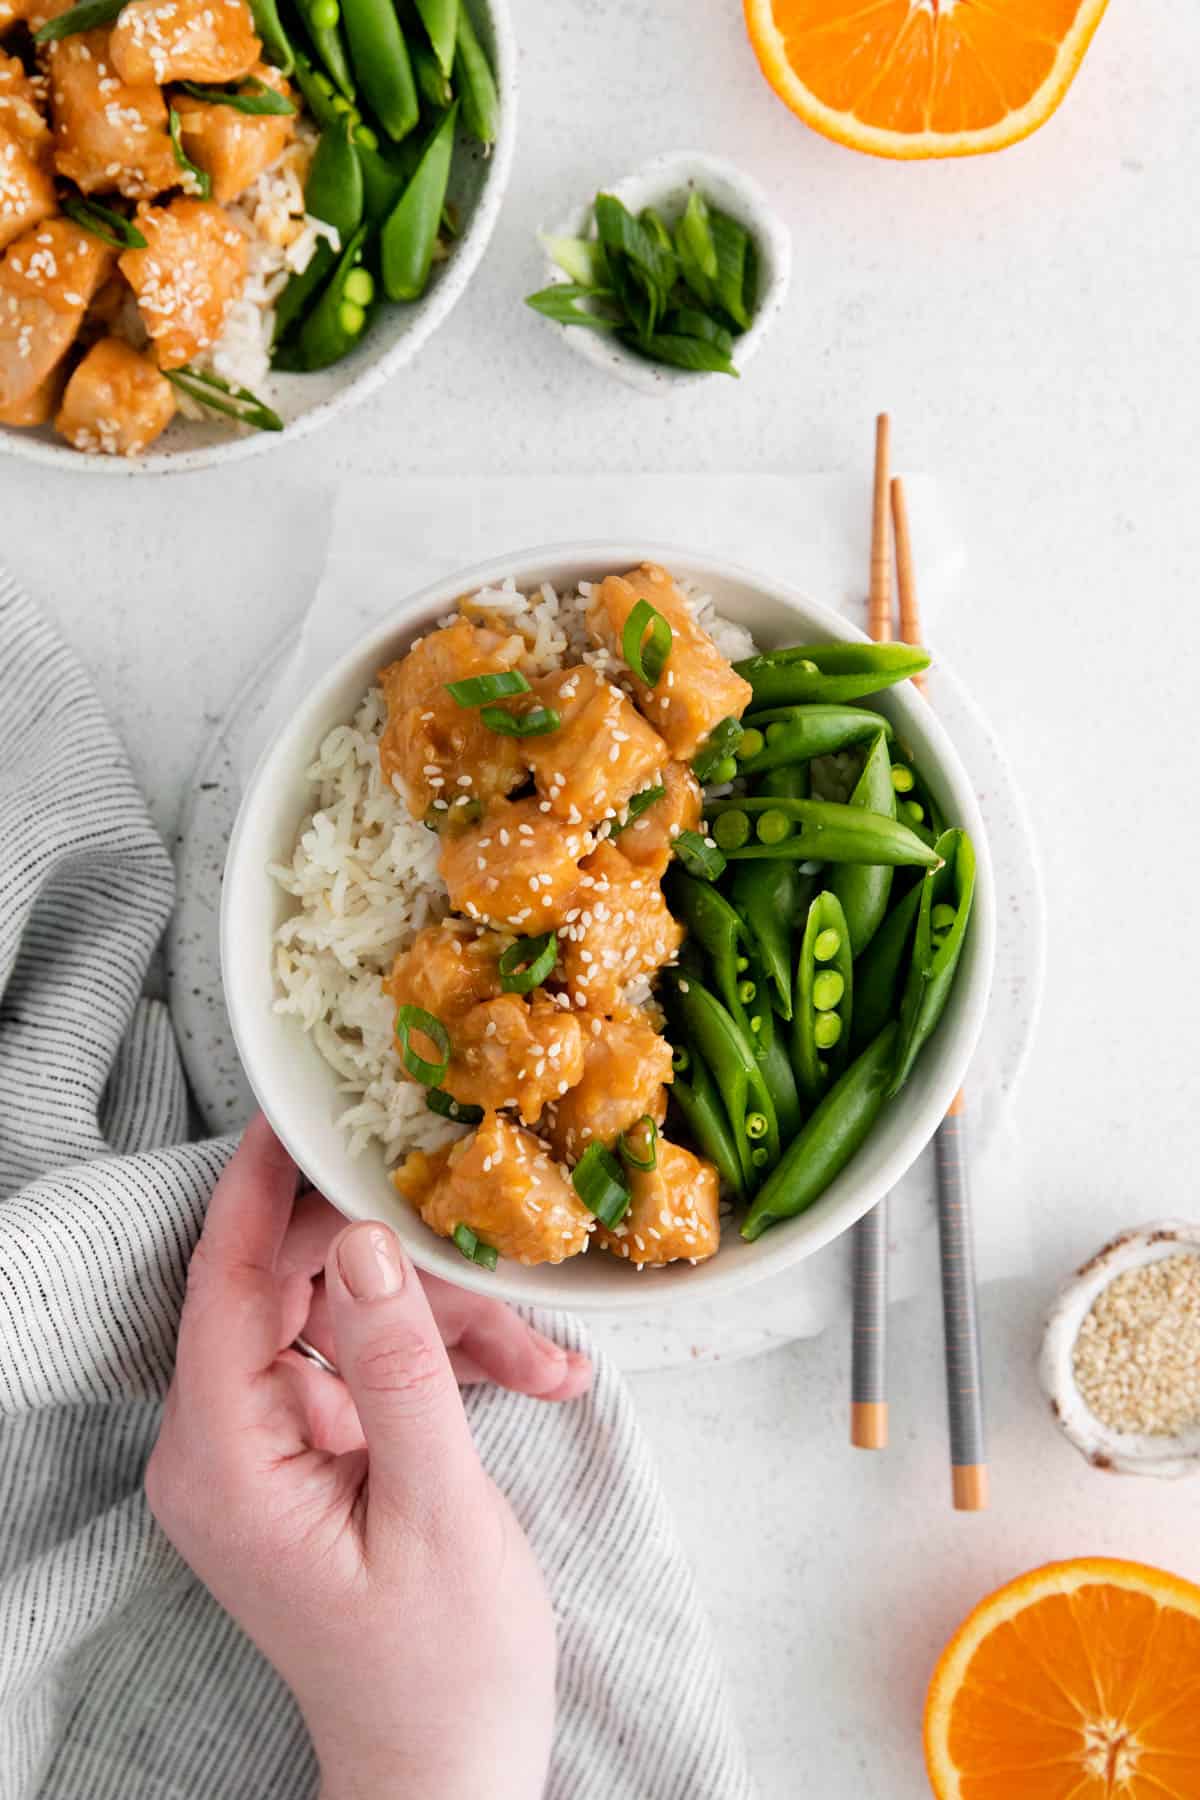 A hand reaching for a bowl of Instant Pot orange chicken.